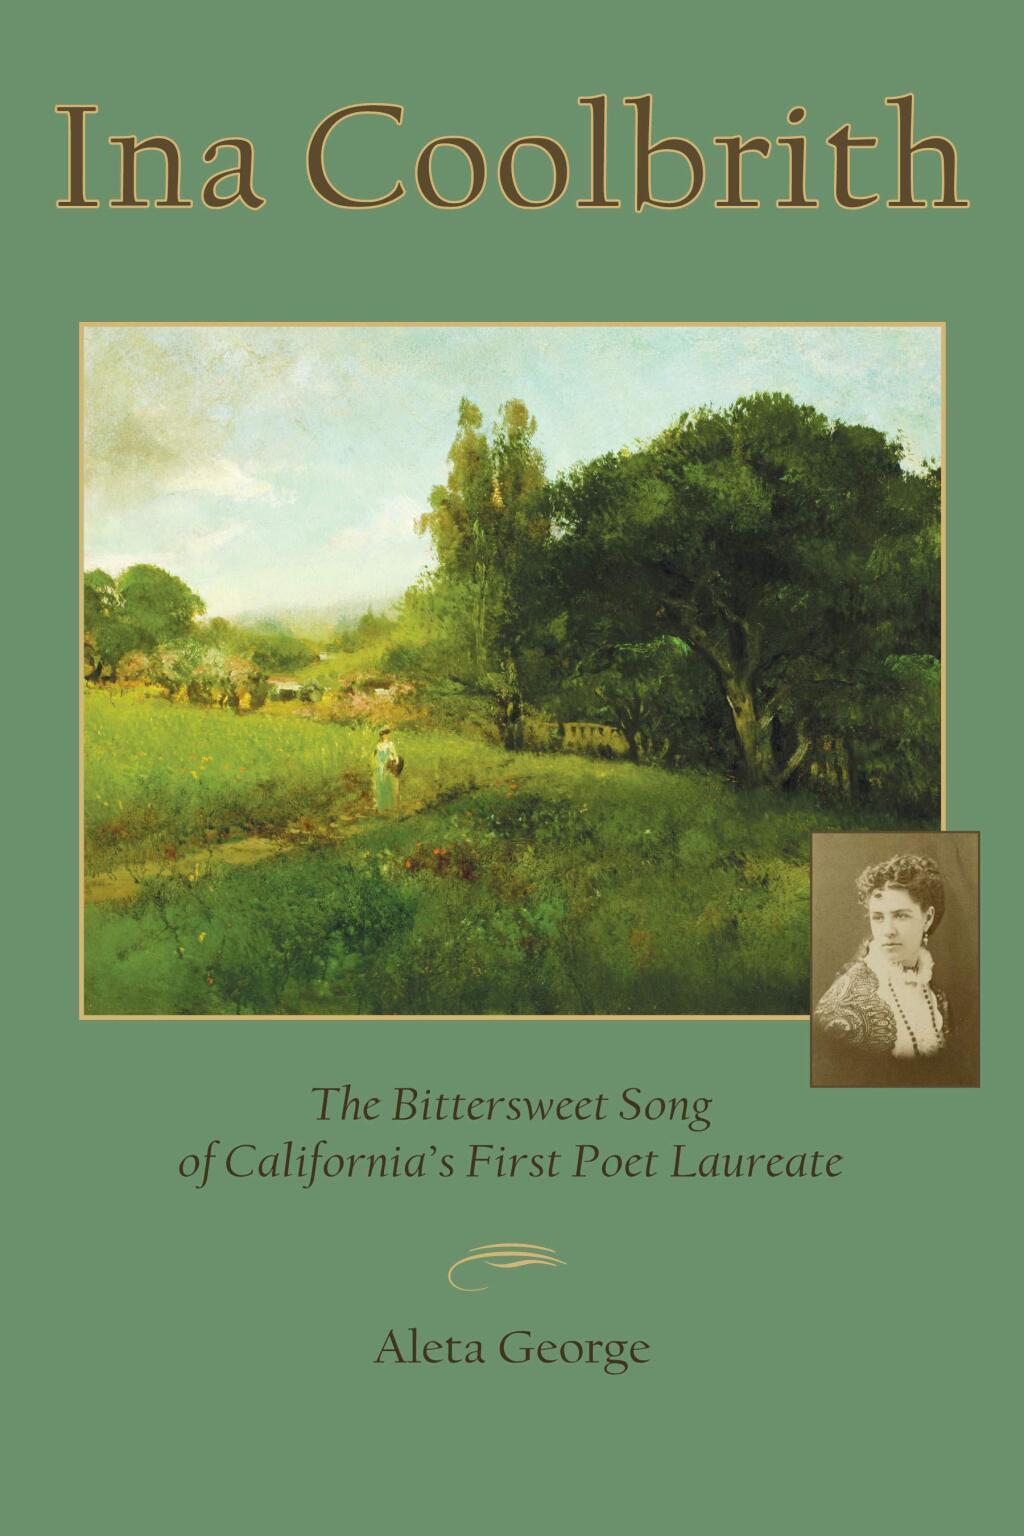 Author Aleta George will introduce local audiences to Ina Coolbrith, the state's first poet laureate, in an Aug. 27 lecture at Jack London State Historic Park.